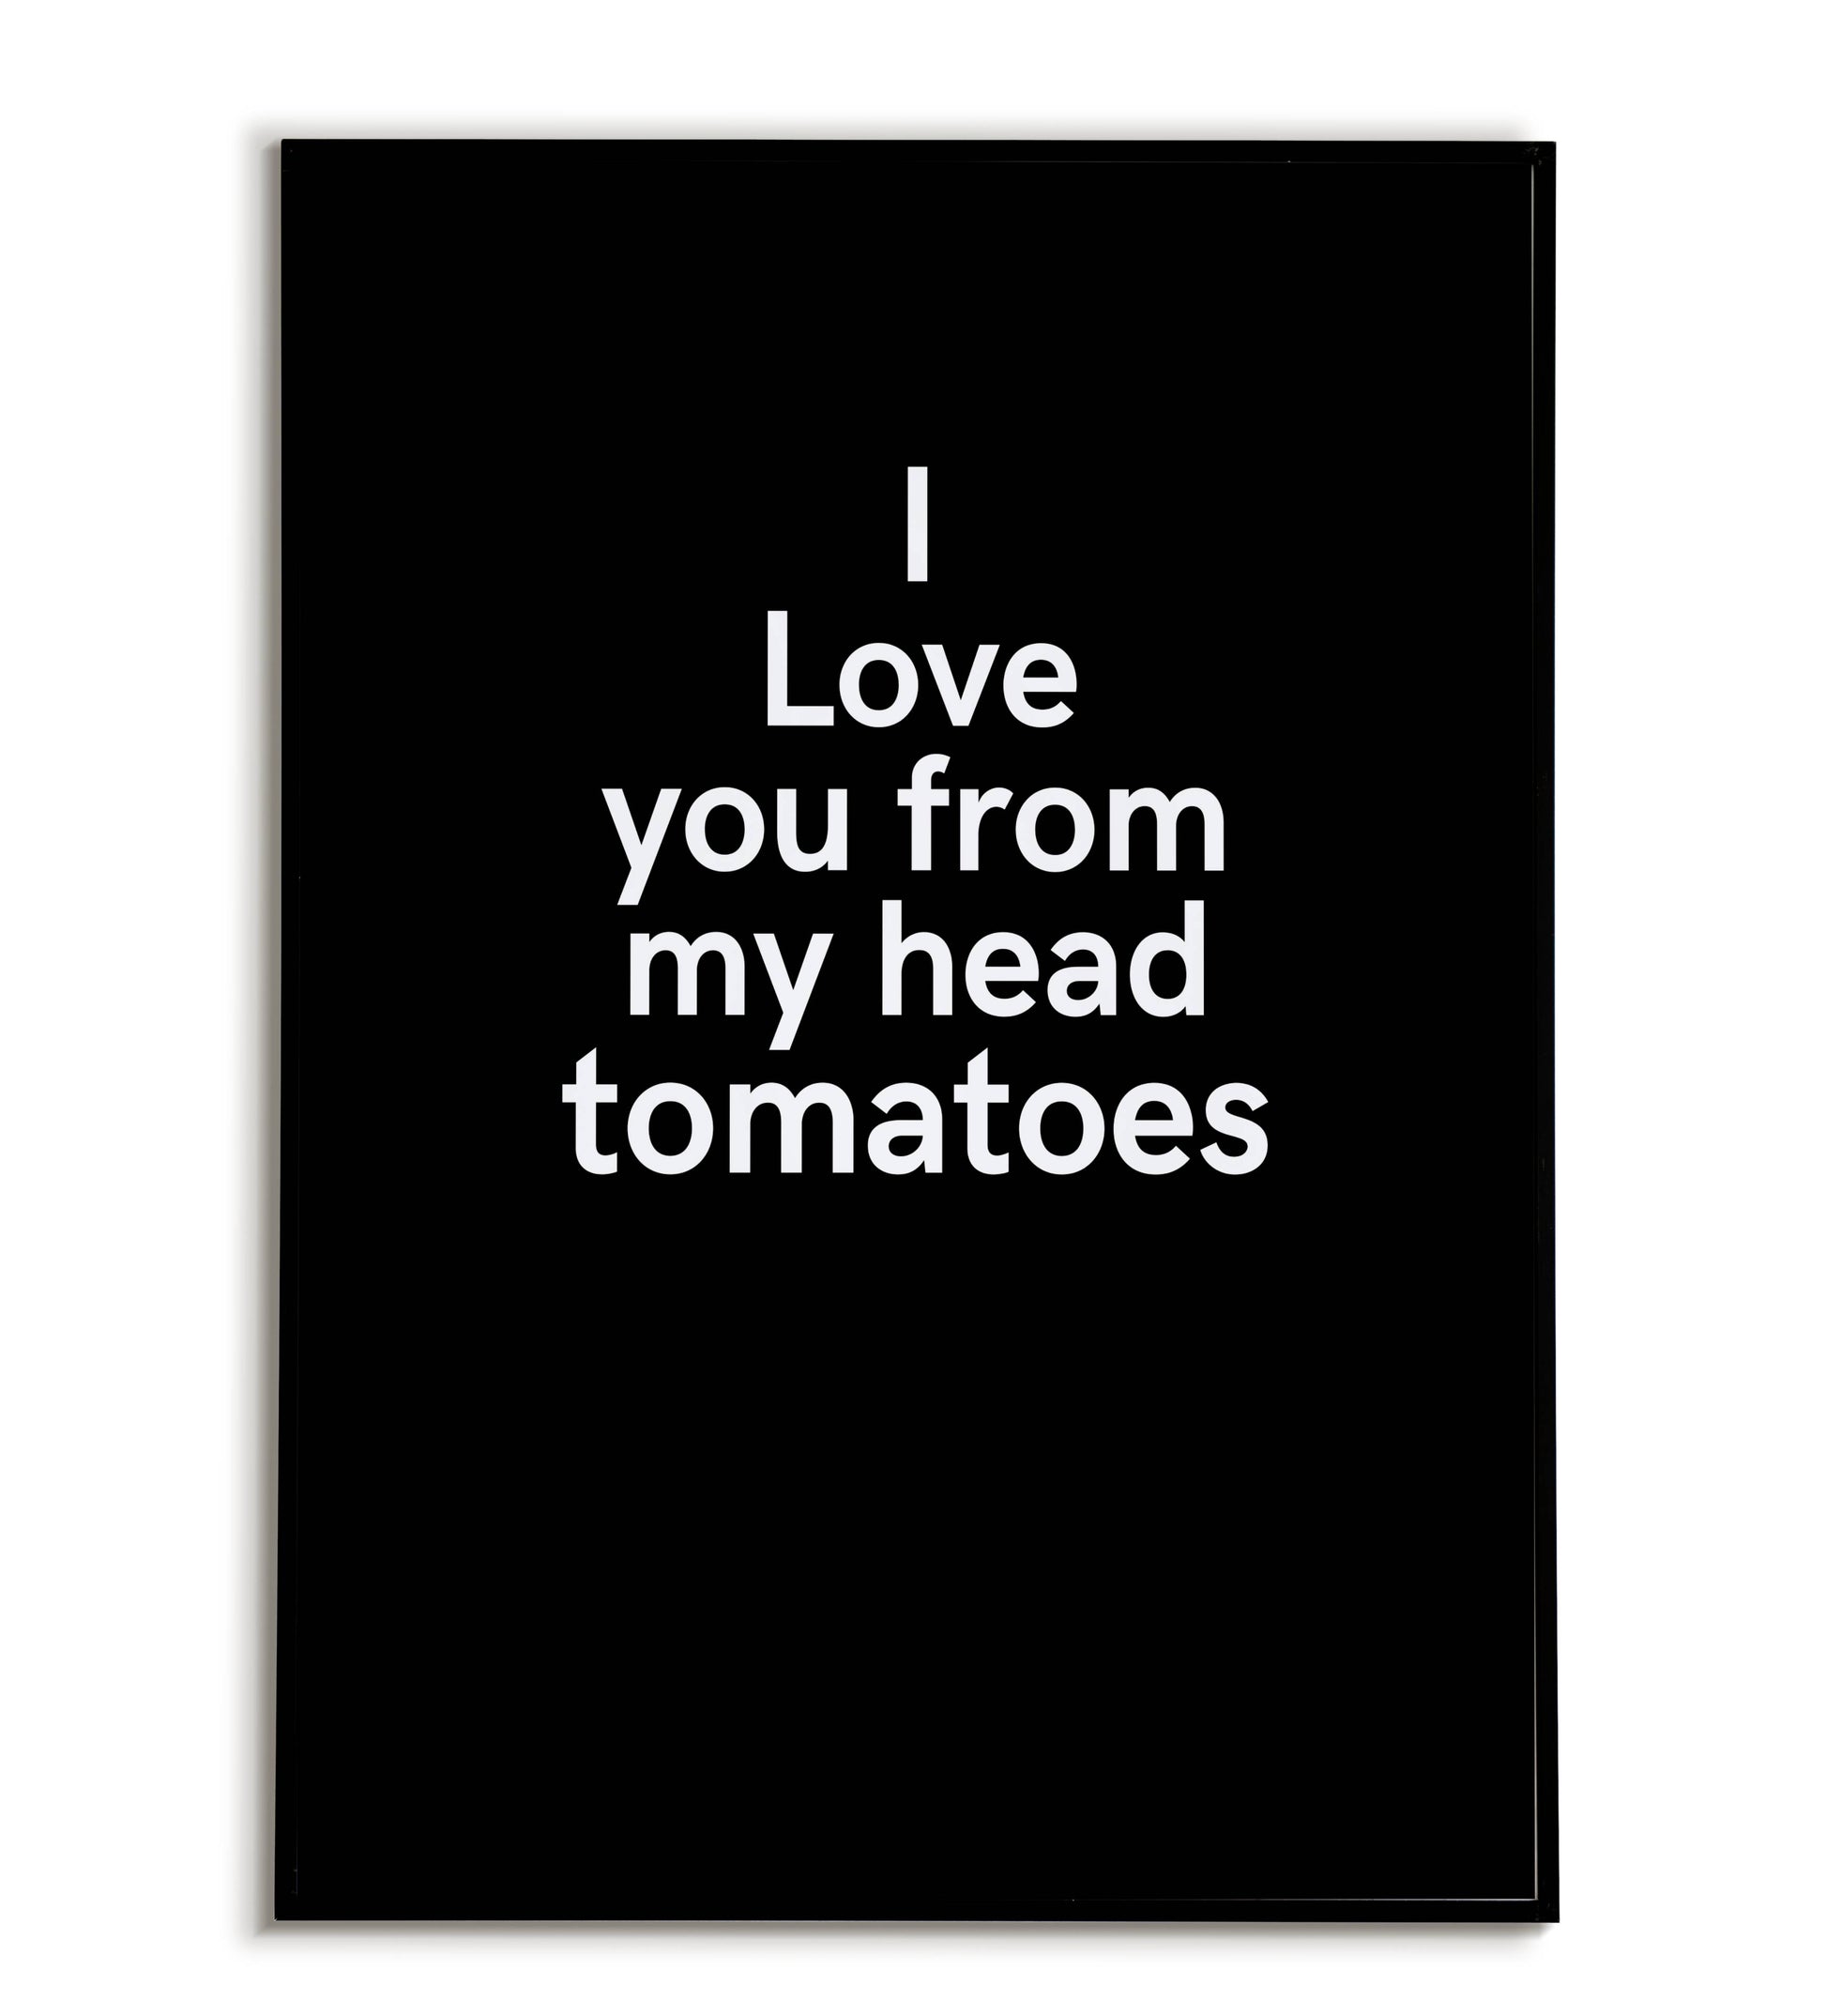 Humorous "I love you from head tomatoes" printable poster, a playful way to express your love, with a vegetable twist.	